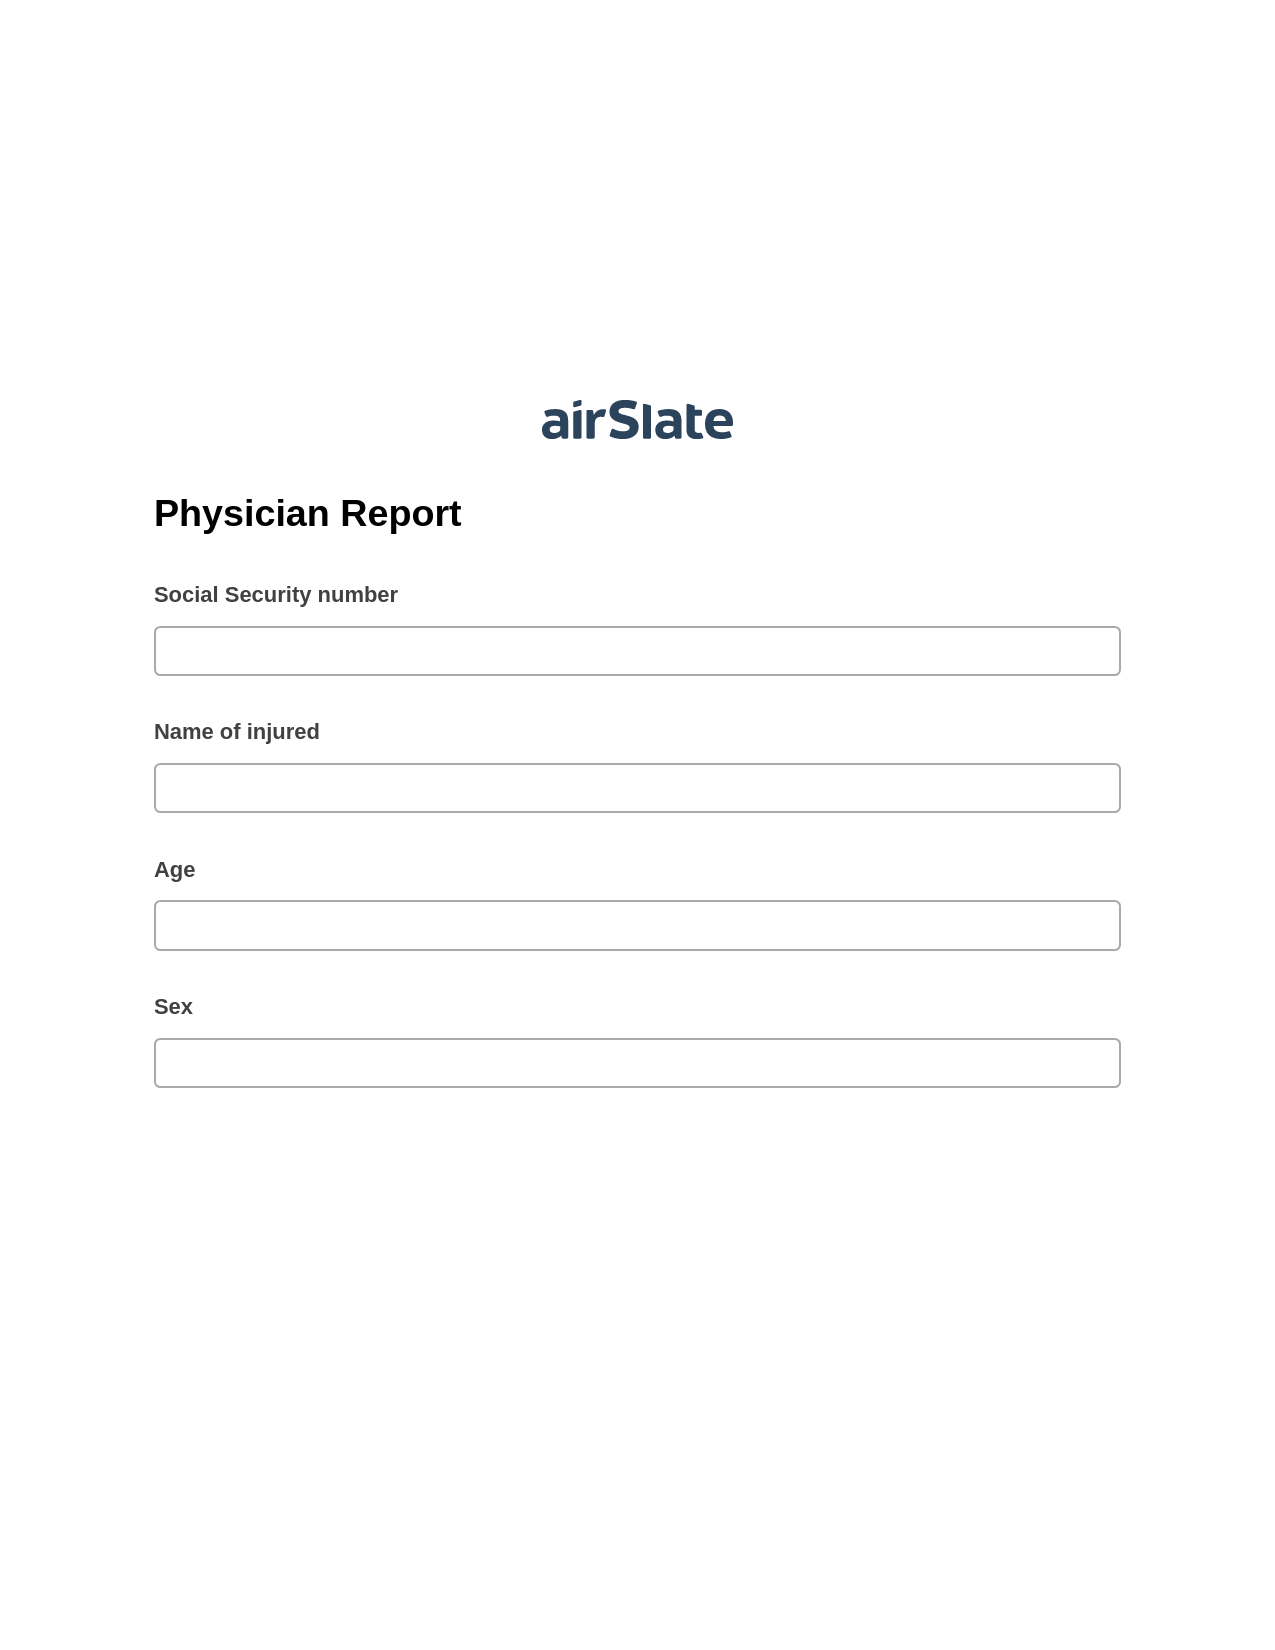 Multirole Physician Report Pre-fill from MS Dynamics 365 Records, Invoke Salesforce Process Bot, Archive to Box Bot